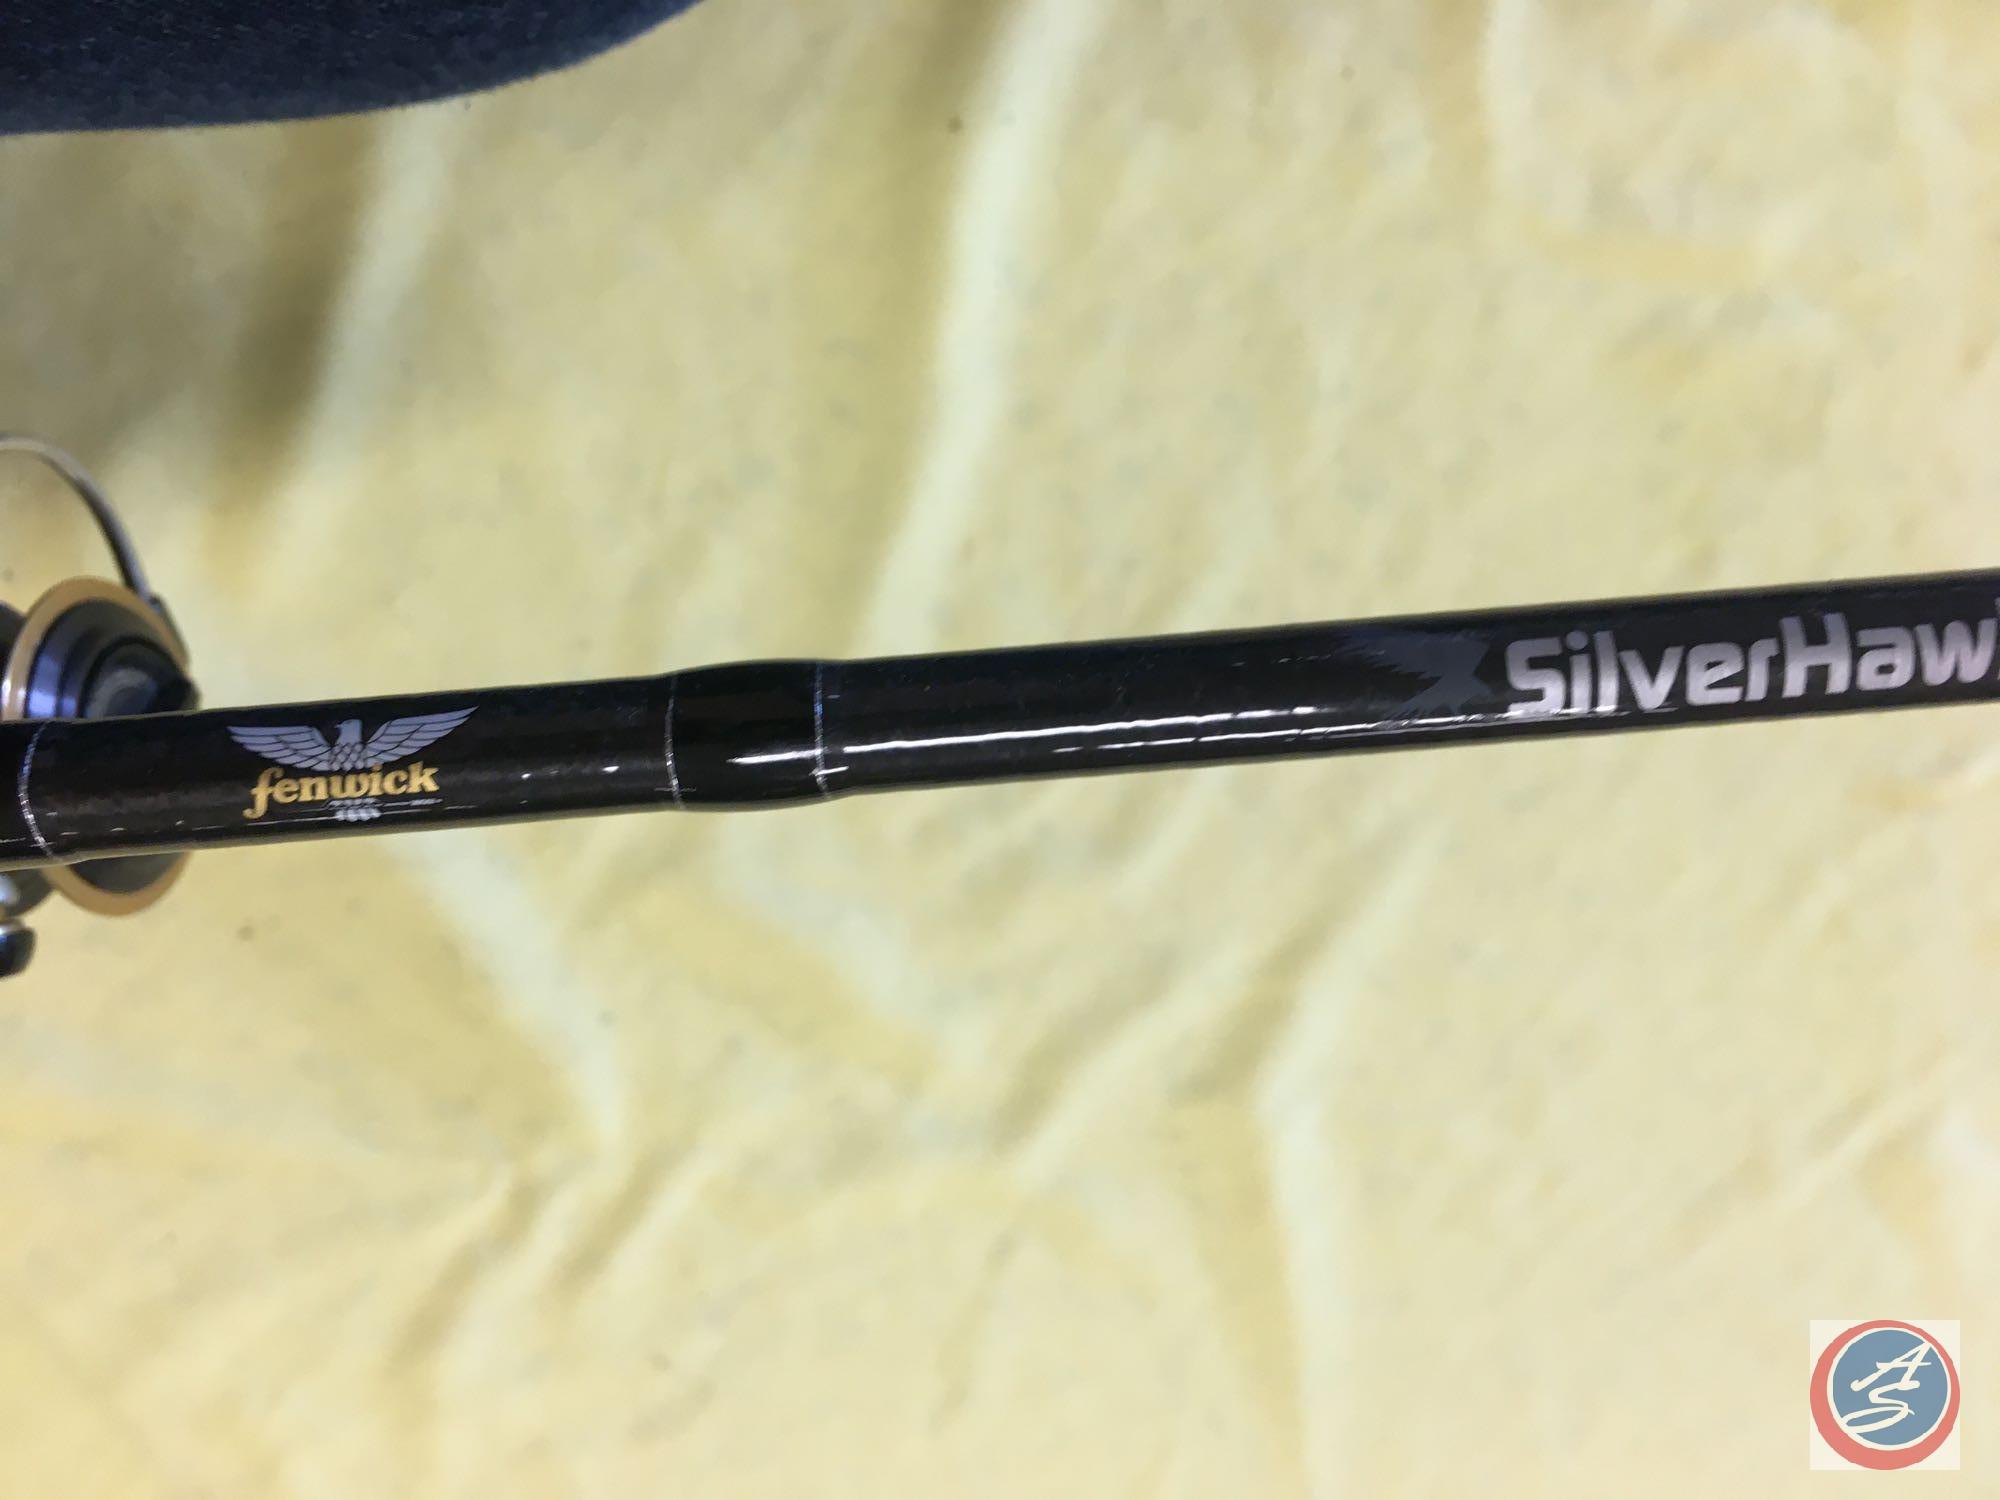 5) Rod and Reel Combos: Pflueger Presidential on